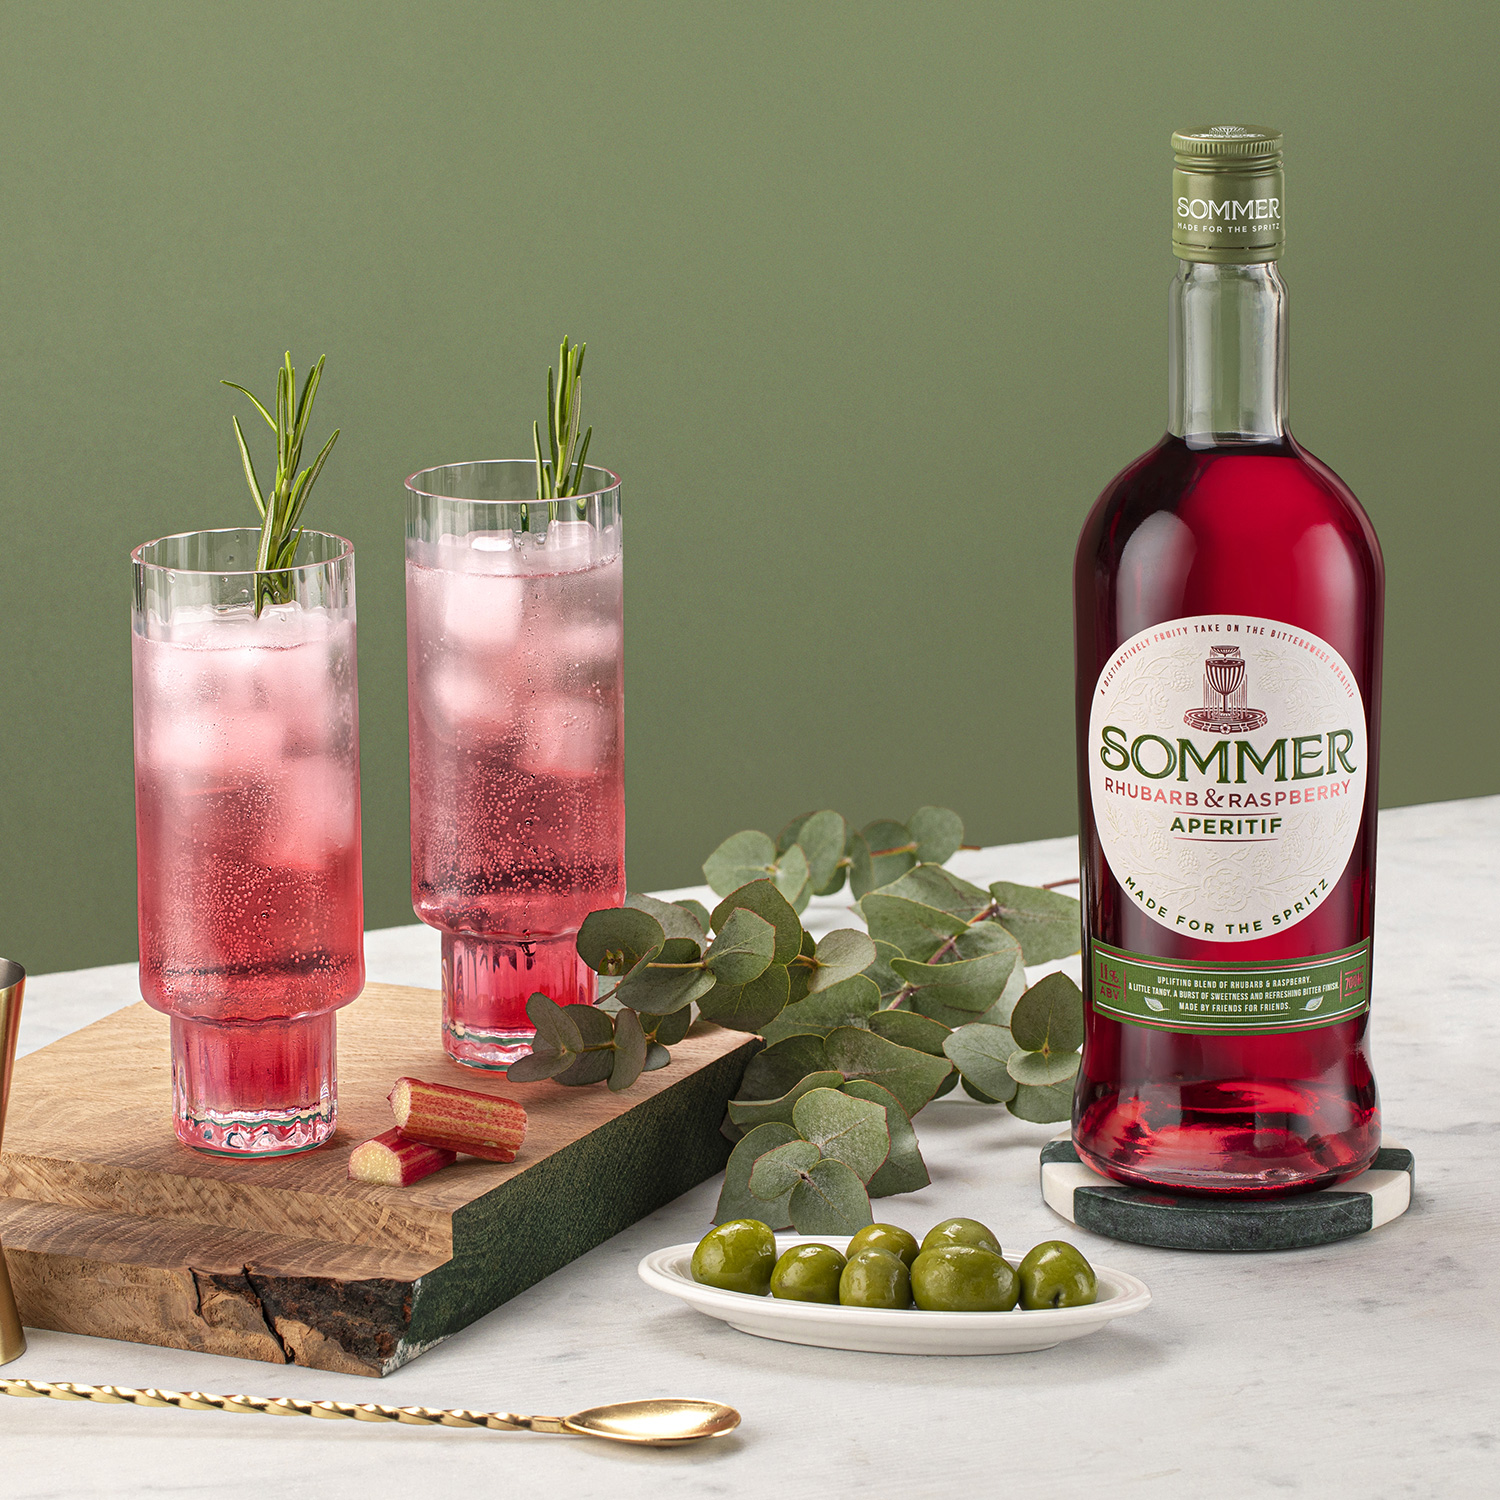 Sommer drinks product